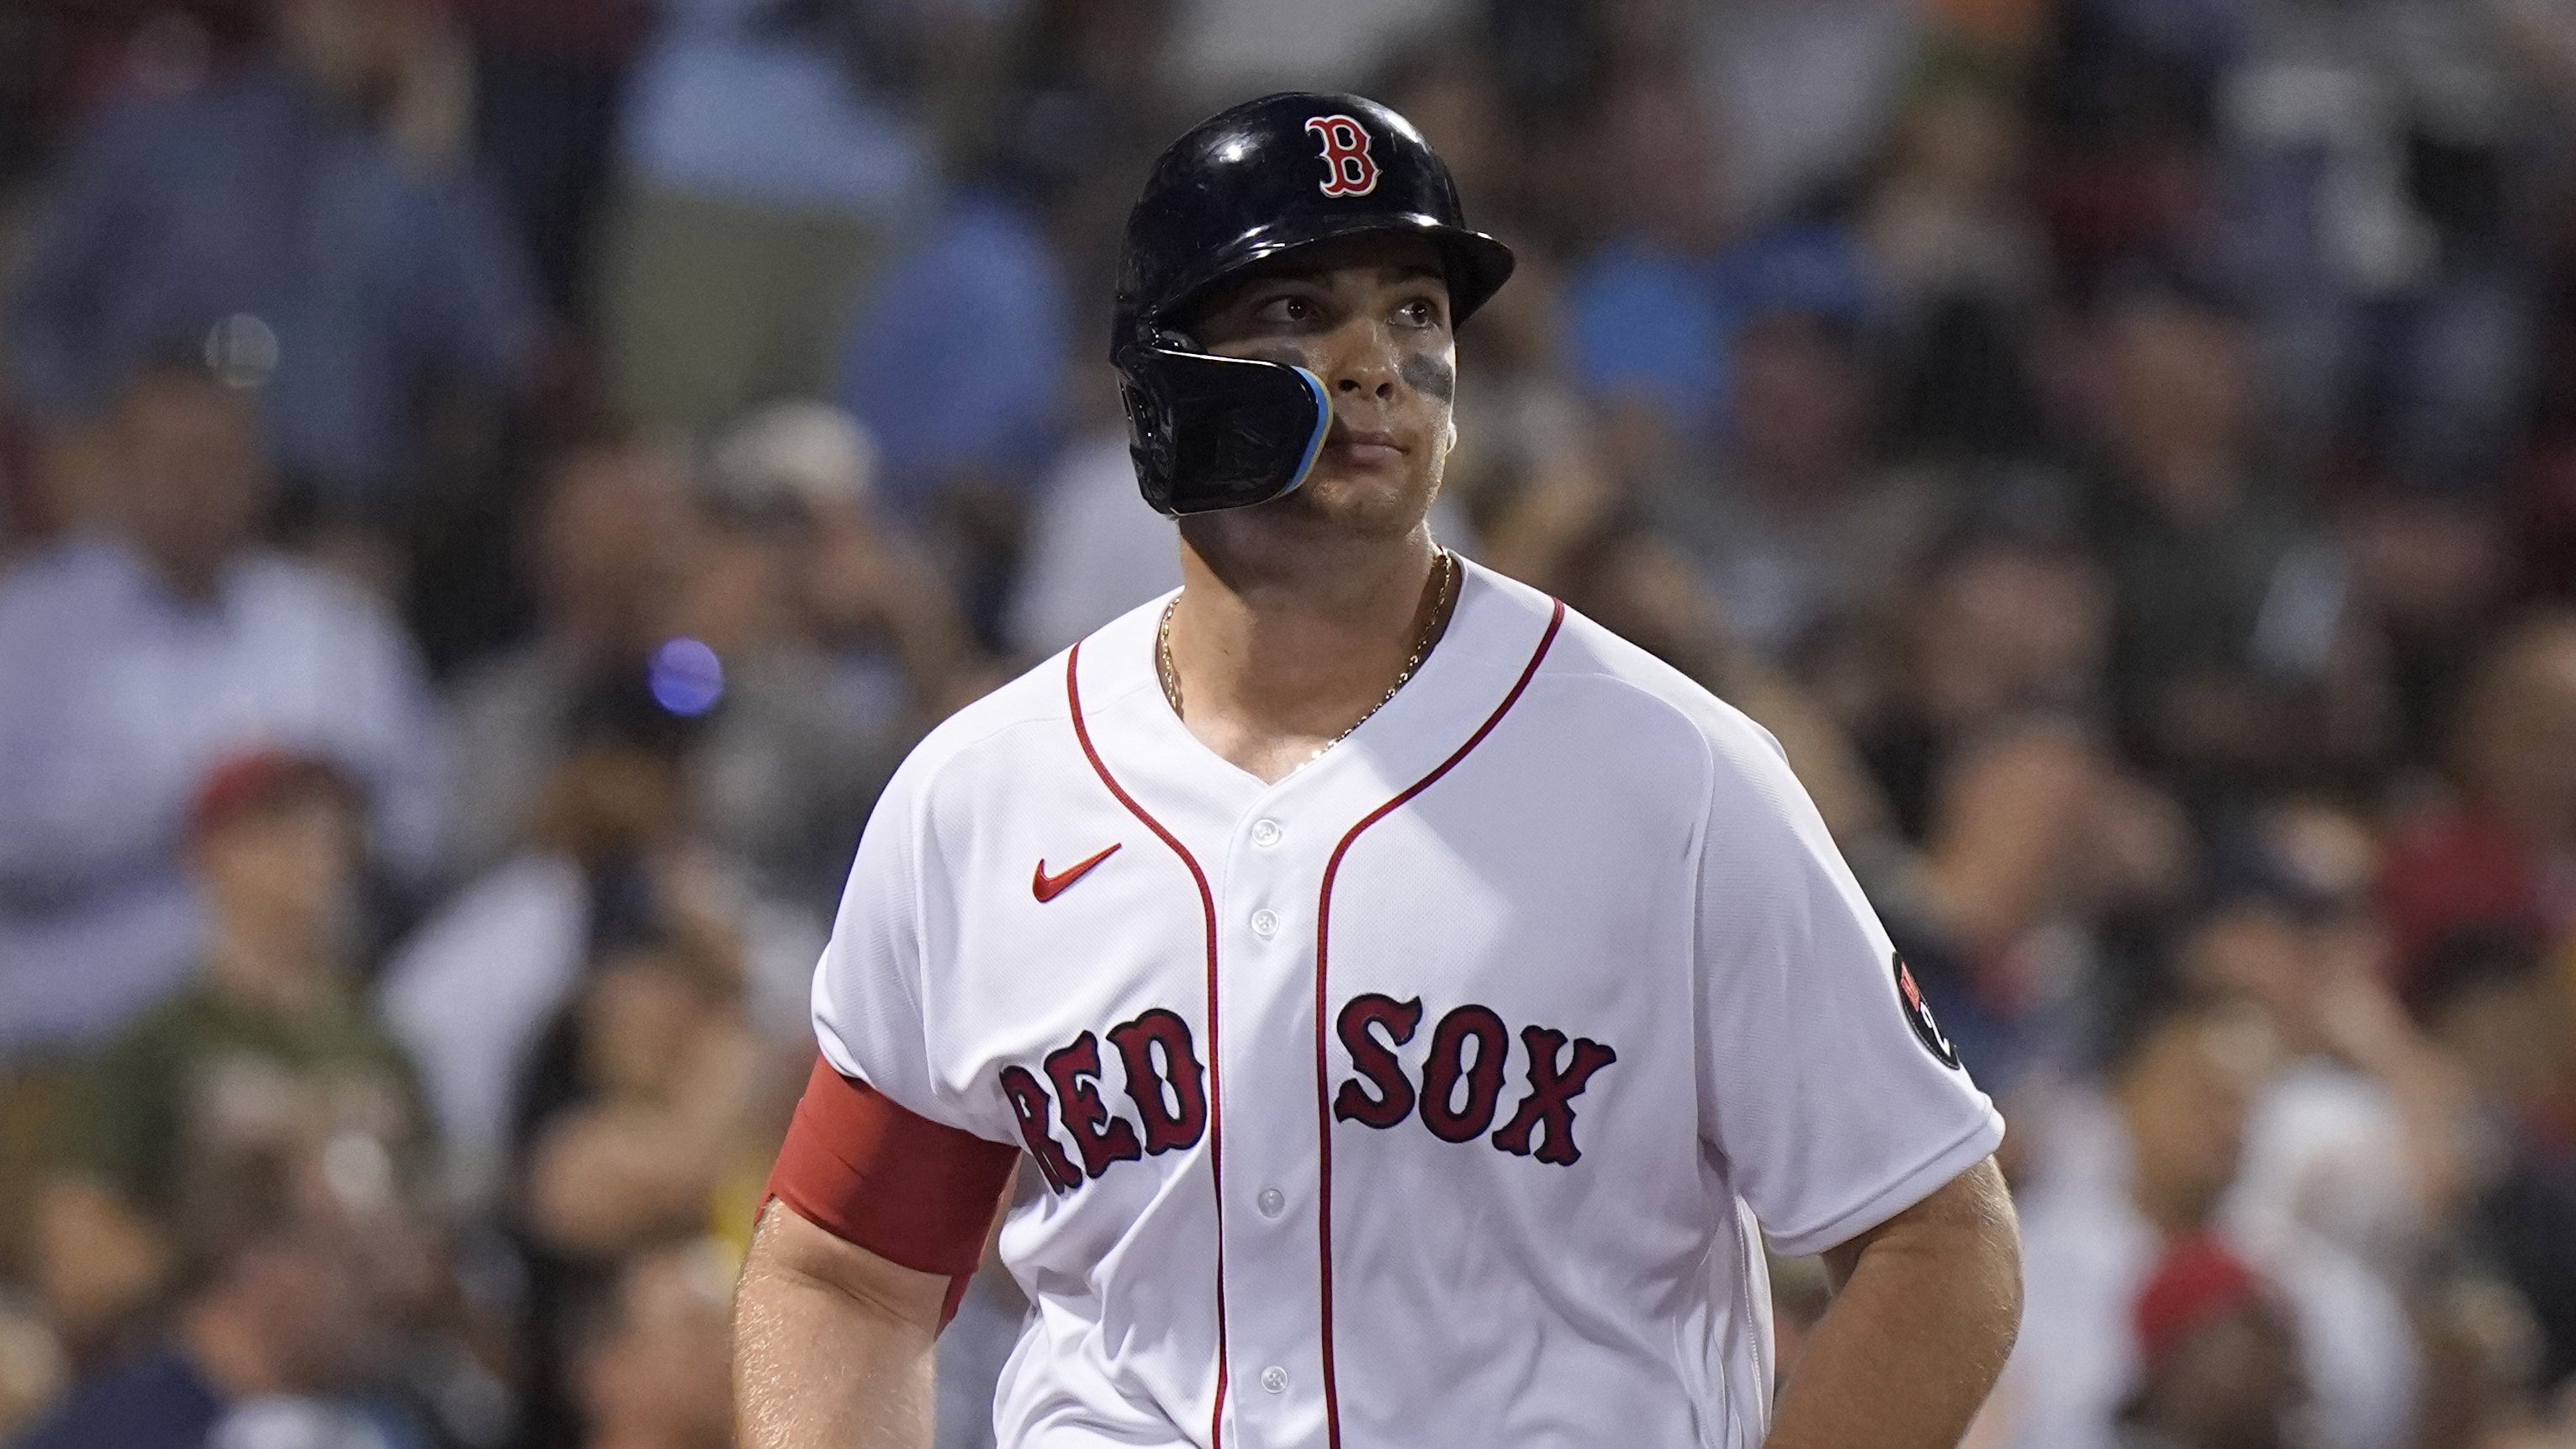 Mazz: Has Matt Barnes become unglued? And was this another Red Sox